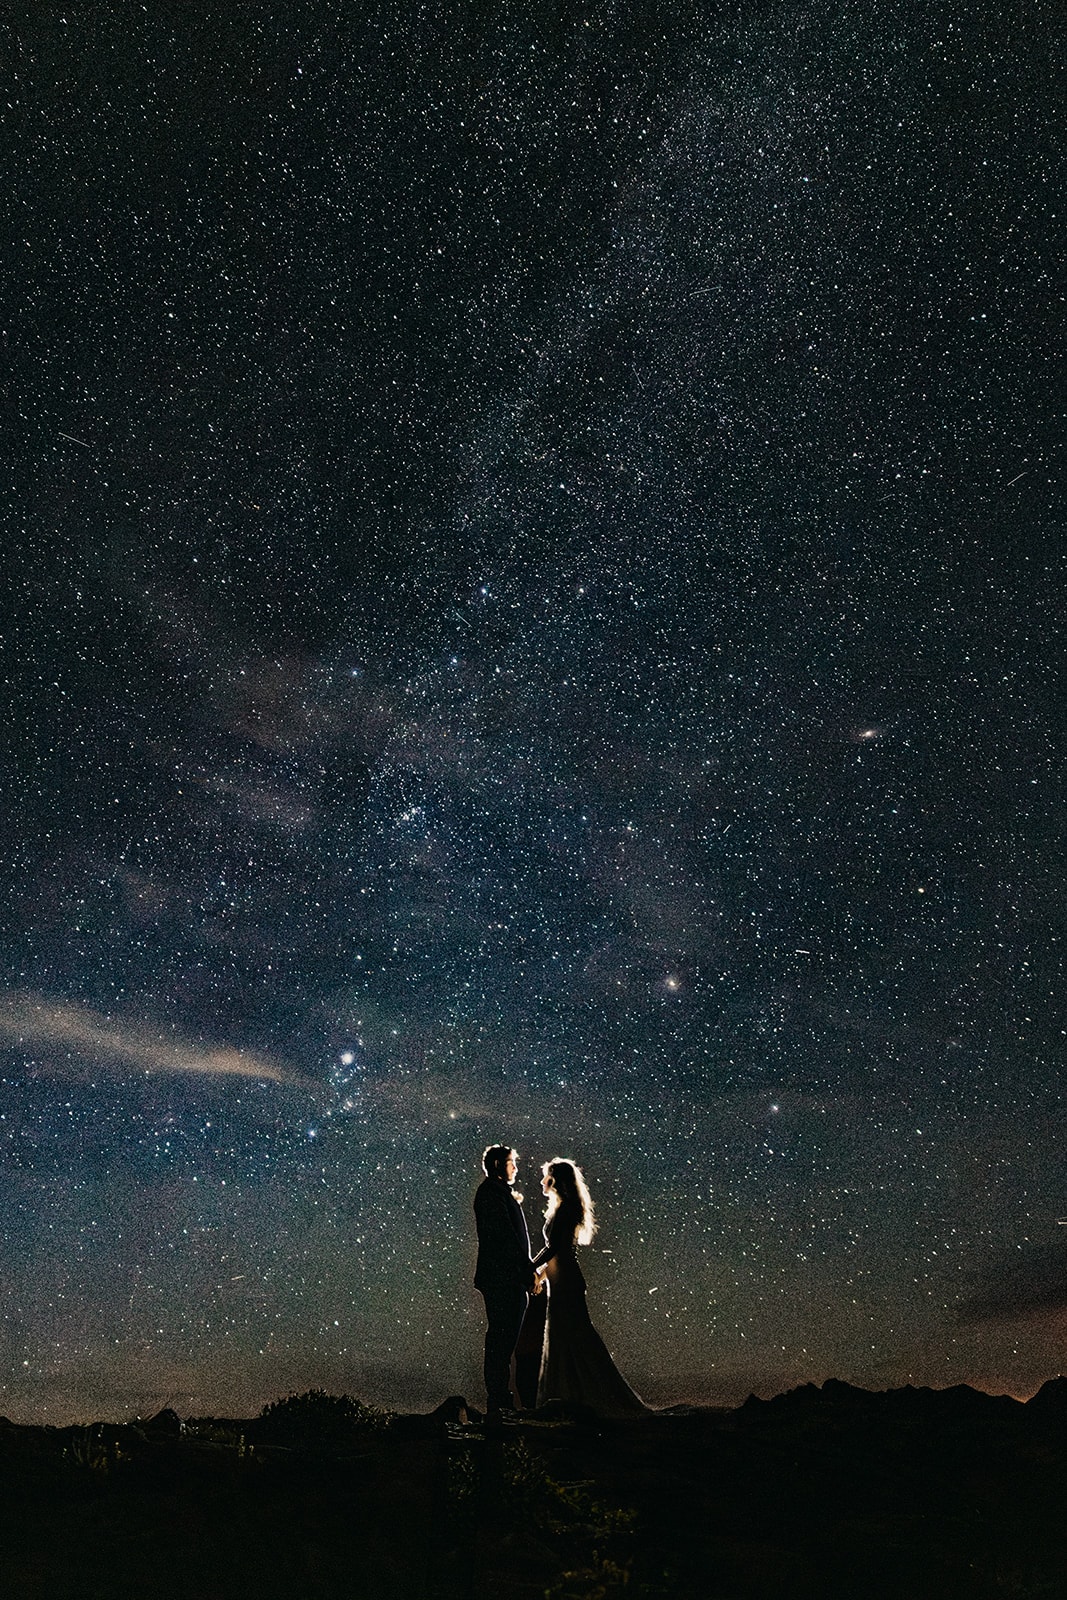 The couple stands for a portrait with the milky way.